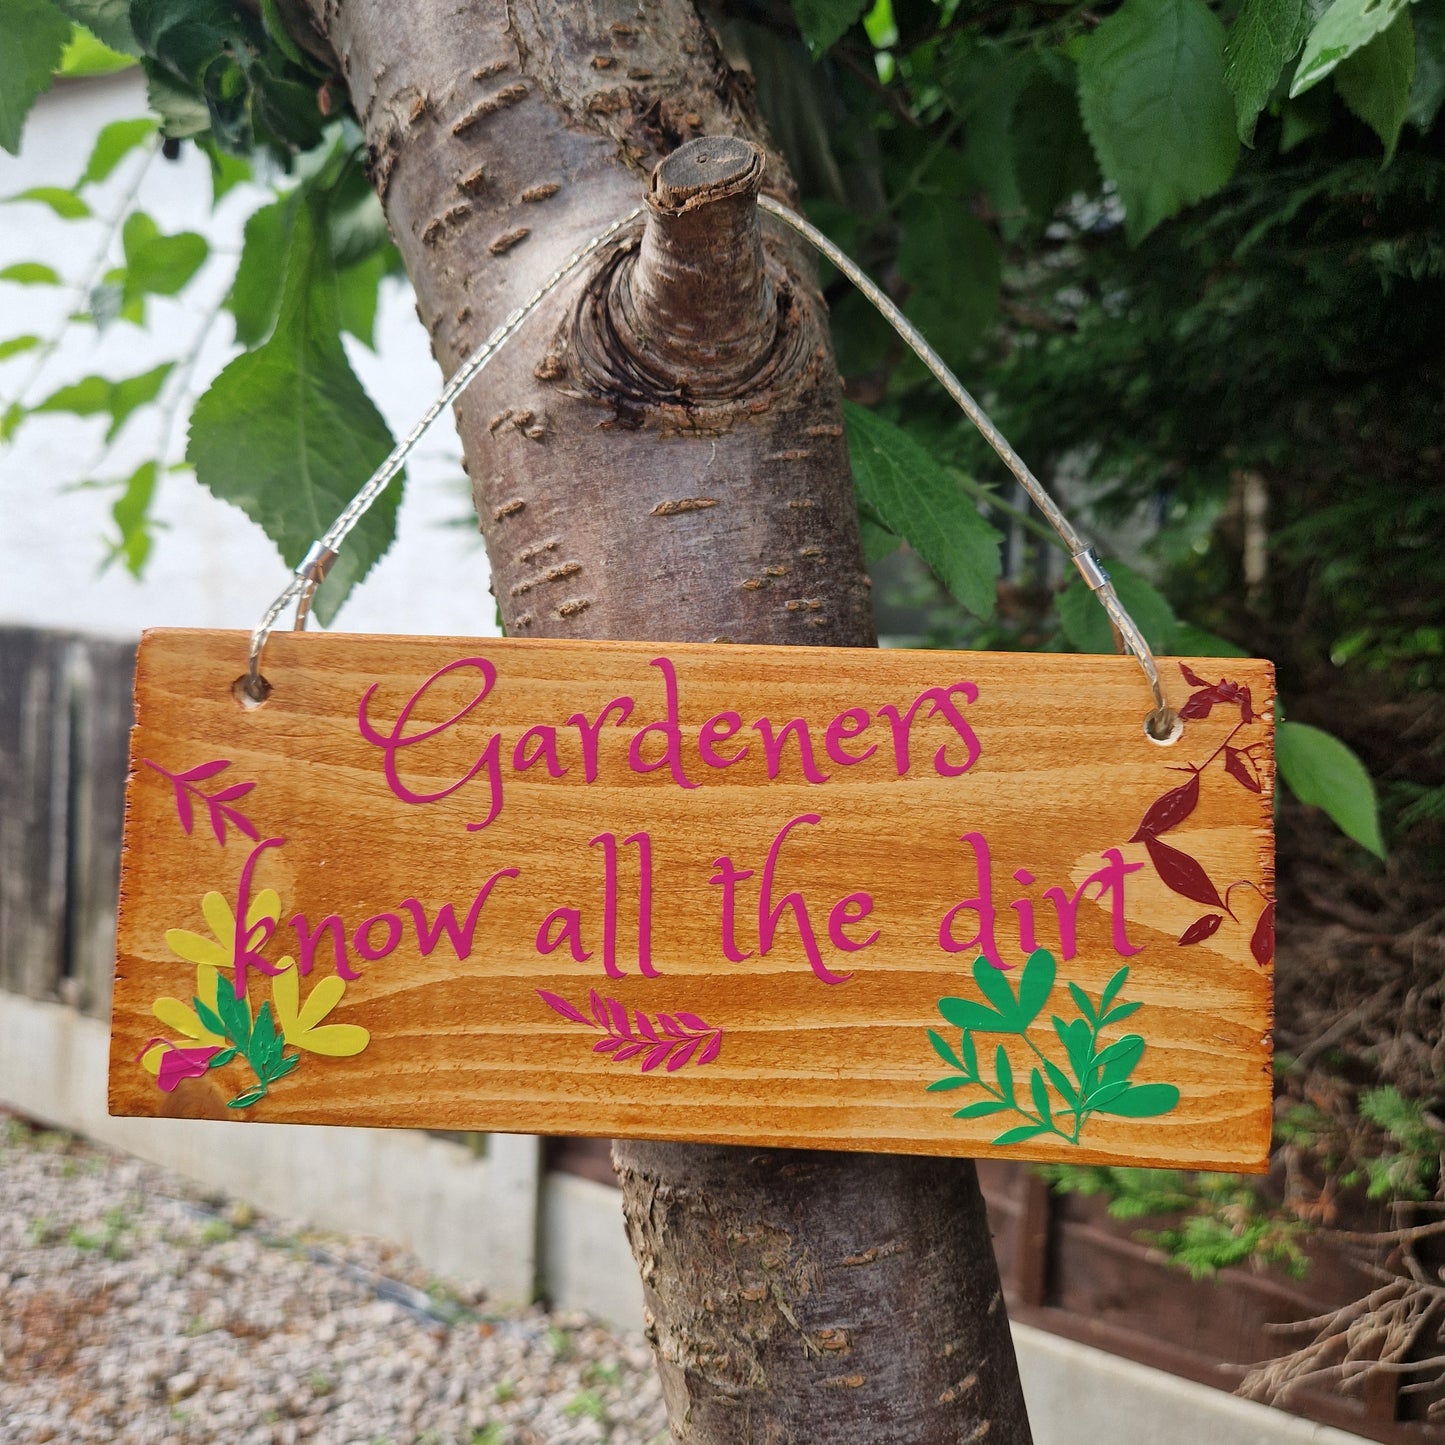 funny garden sign - gardeners know all the dirt